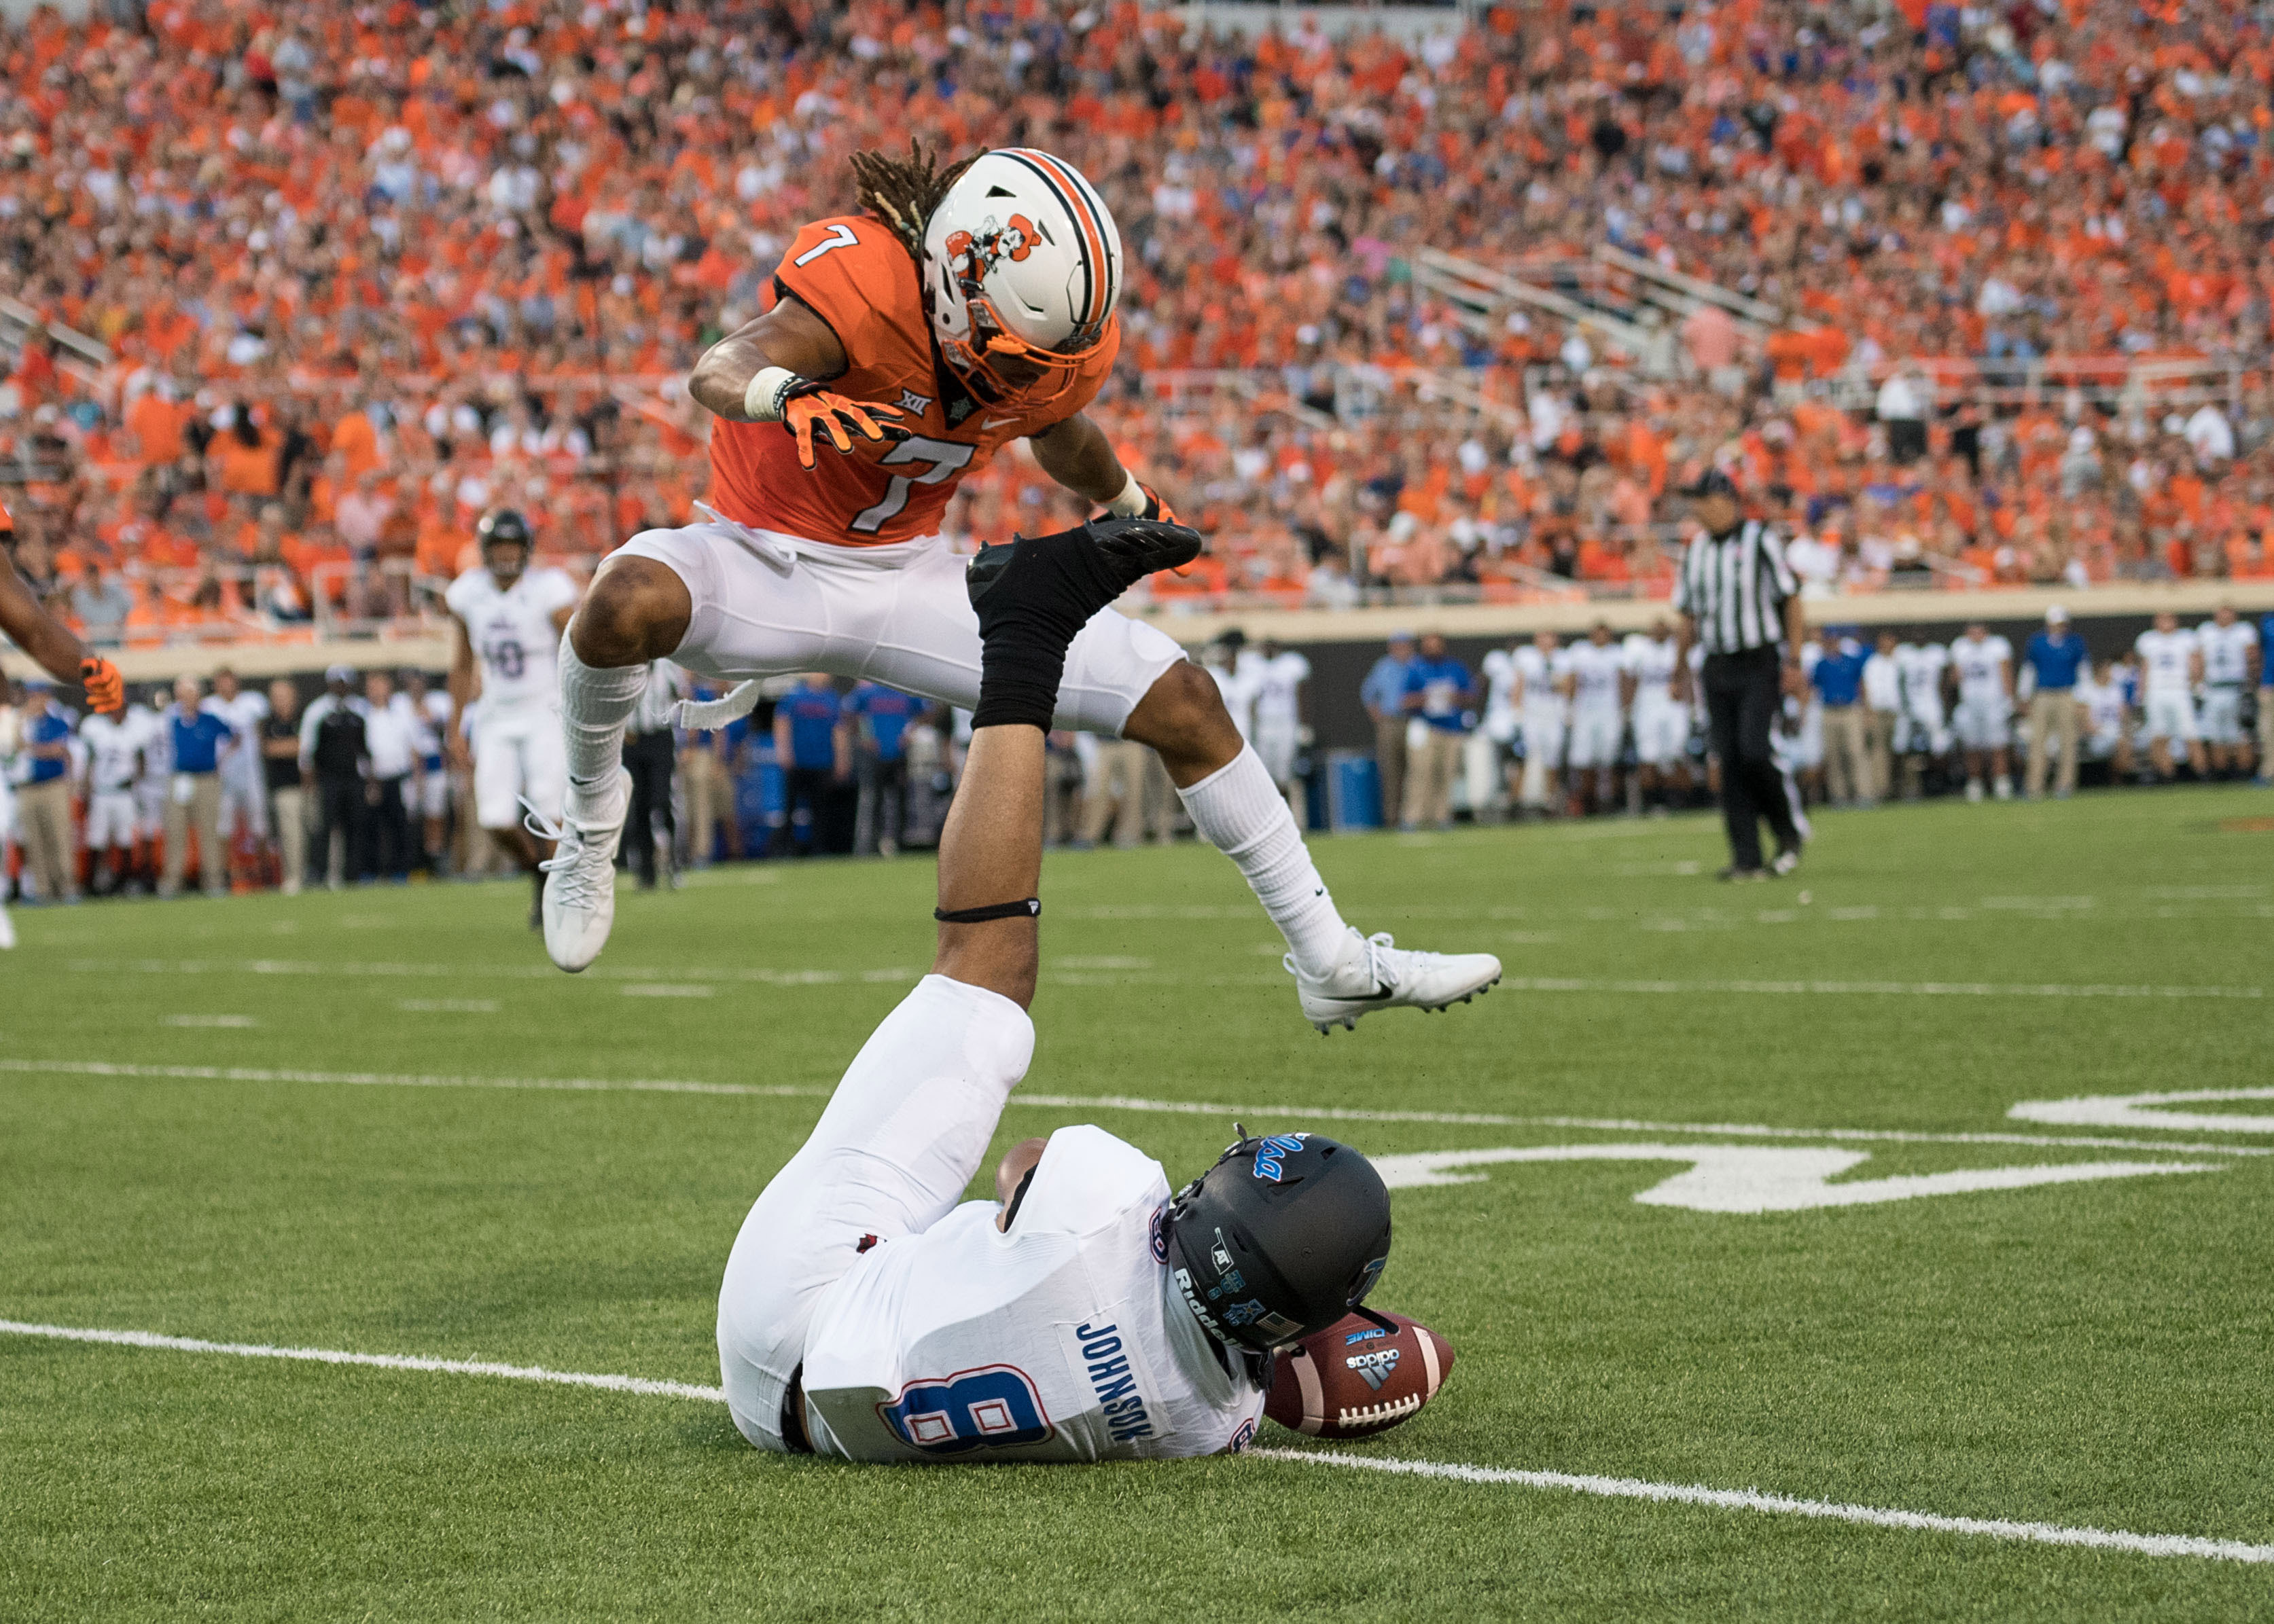 Oklahoma State DB Ramon Richards breaks up a pass intended for Tulsa WR Keenen Johnson, August 31, 2017.